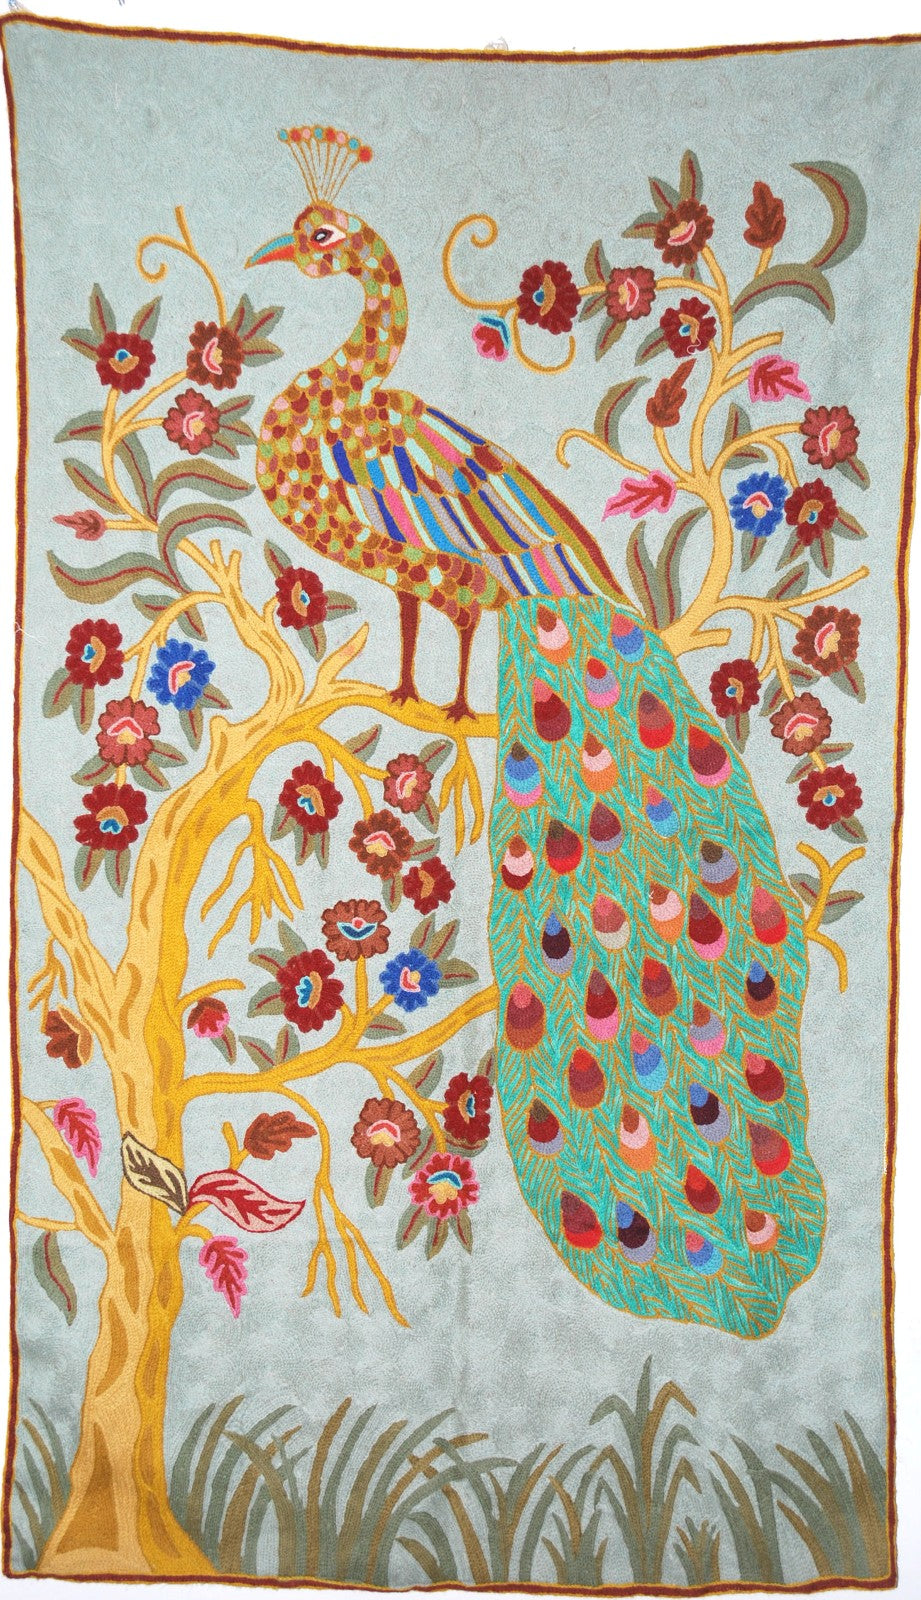 Kashmiri Wool Tapestry Area Rug "Peacock", Multicolor Embroidery 3x5 feet #CWR15115